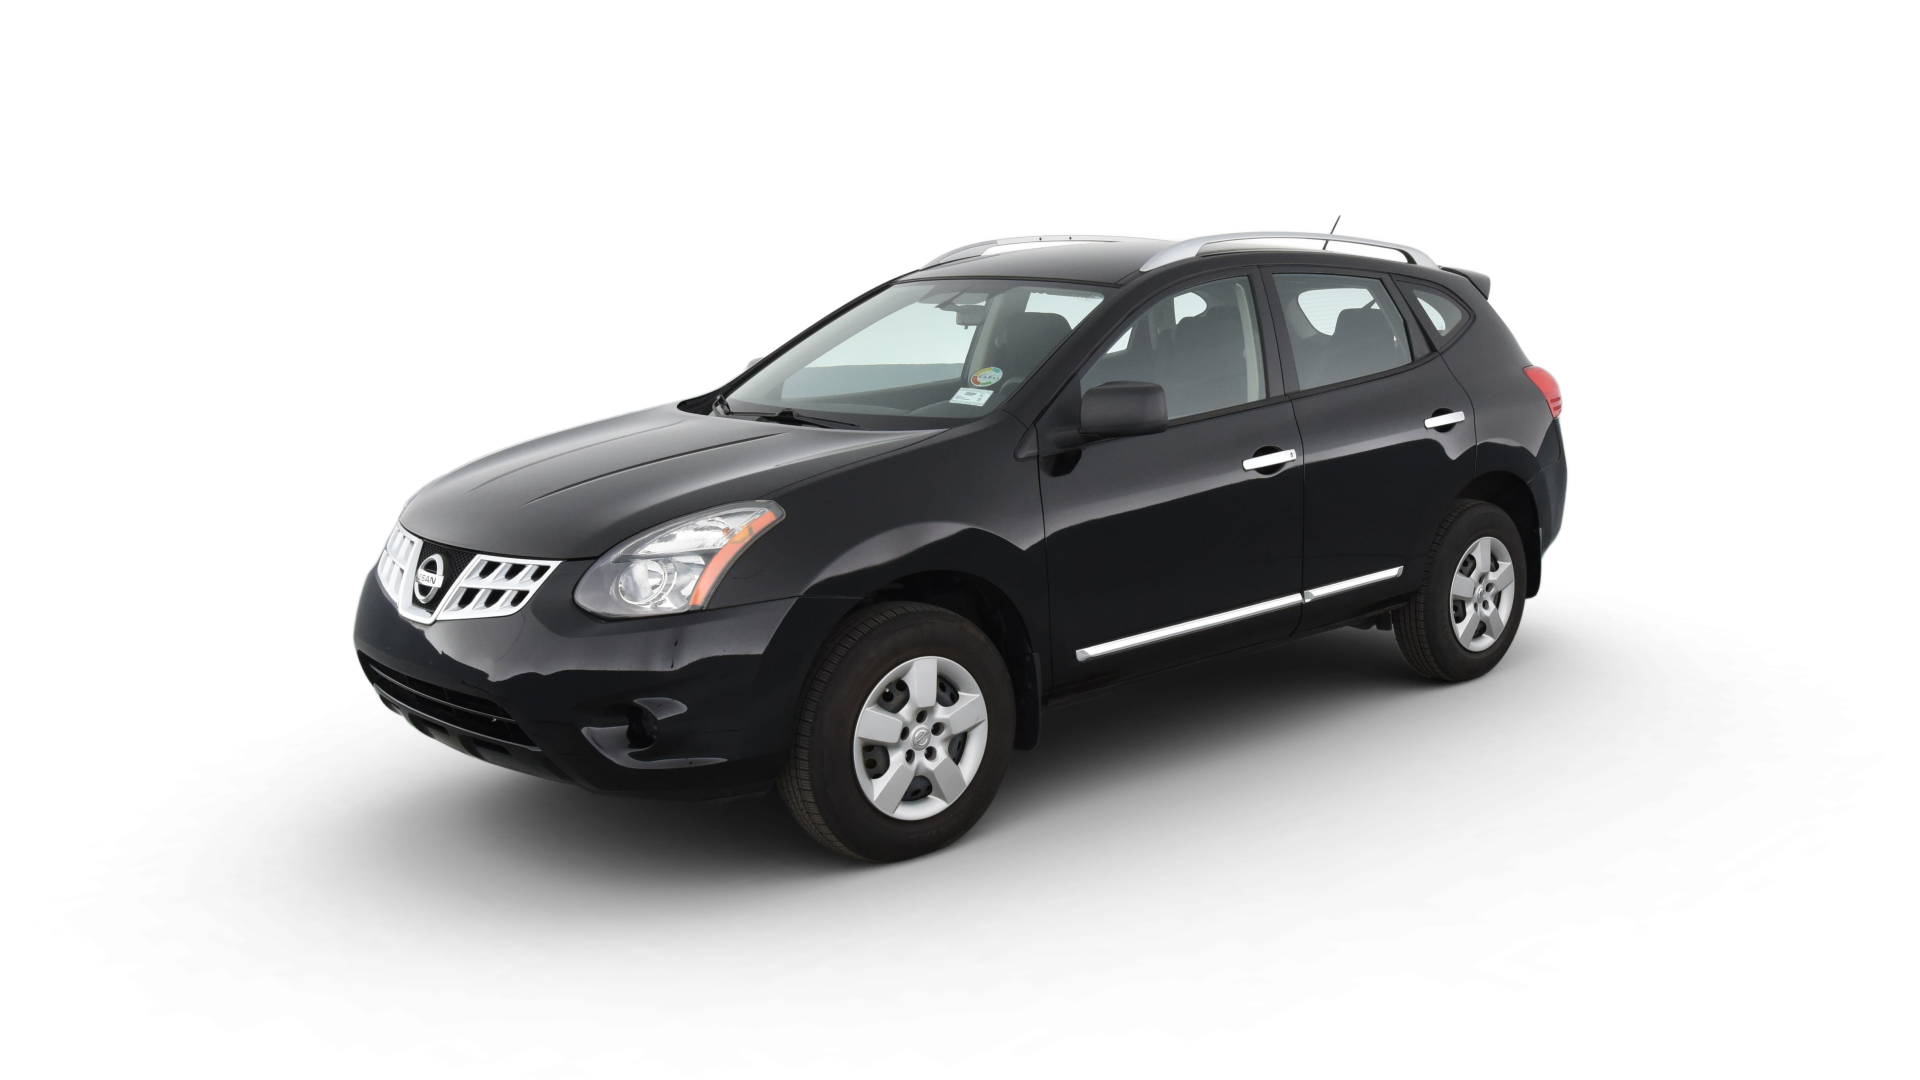 Used Nissan Rogue Select For Sale Online | Carvana